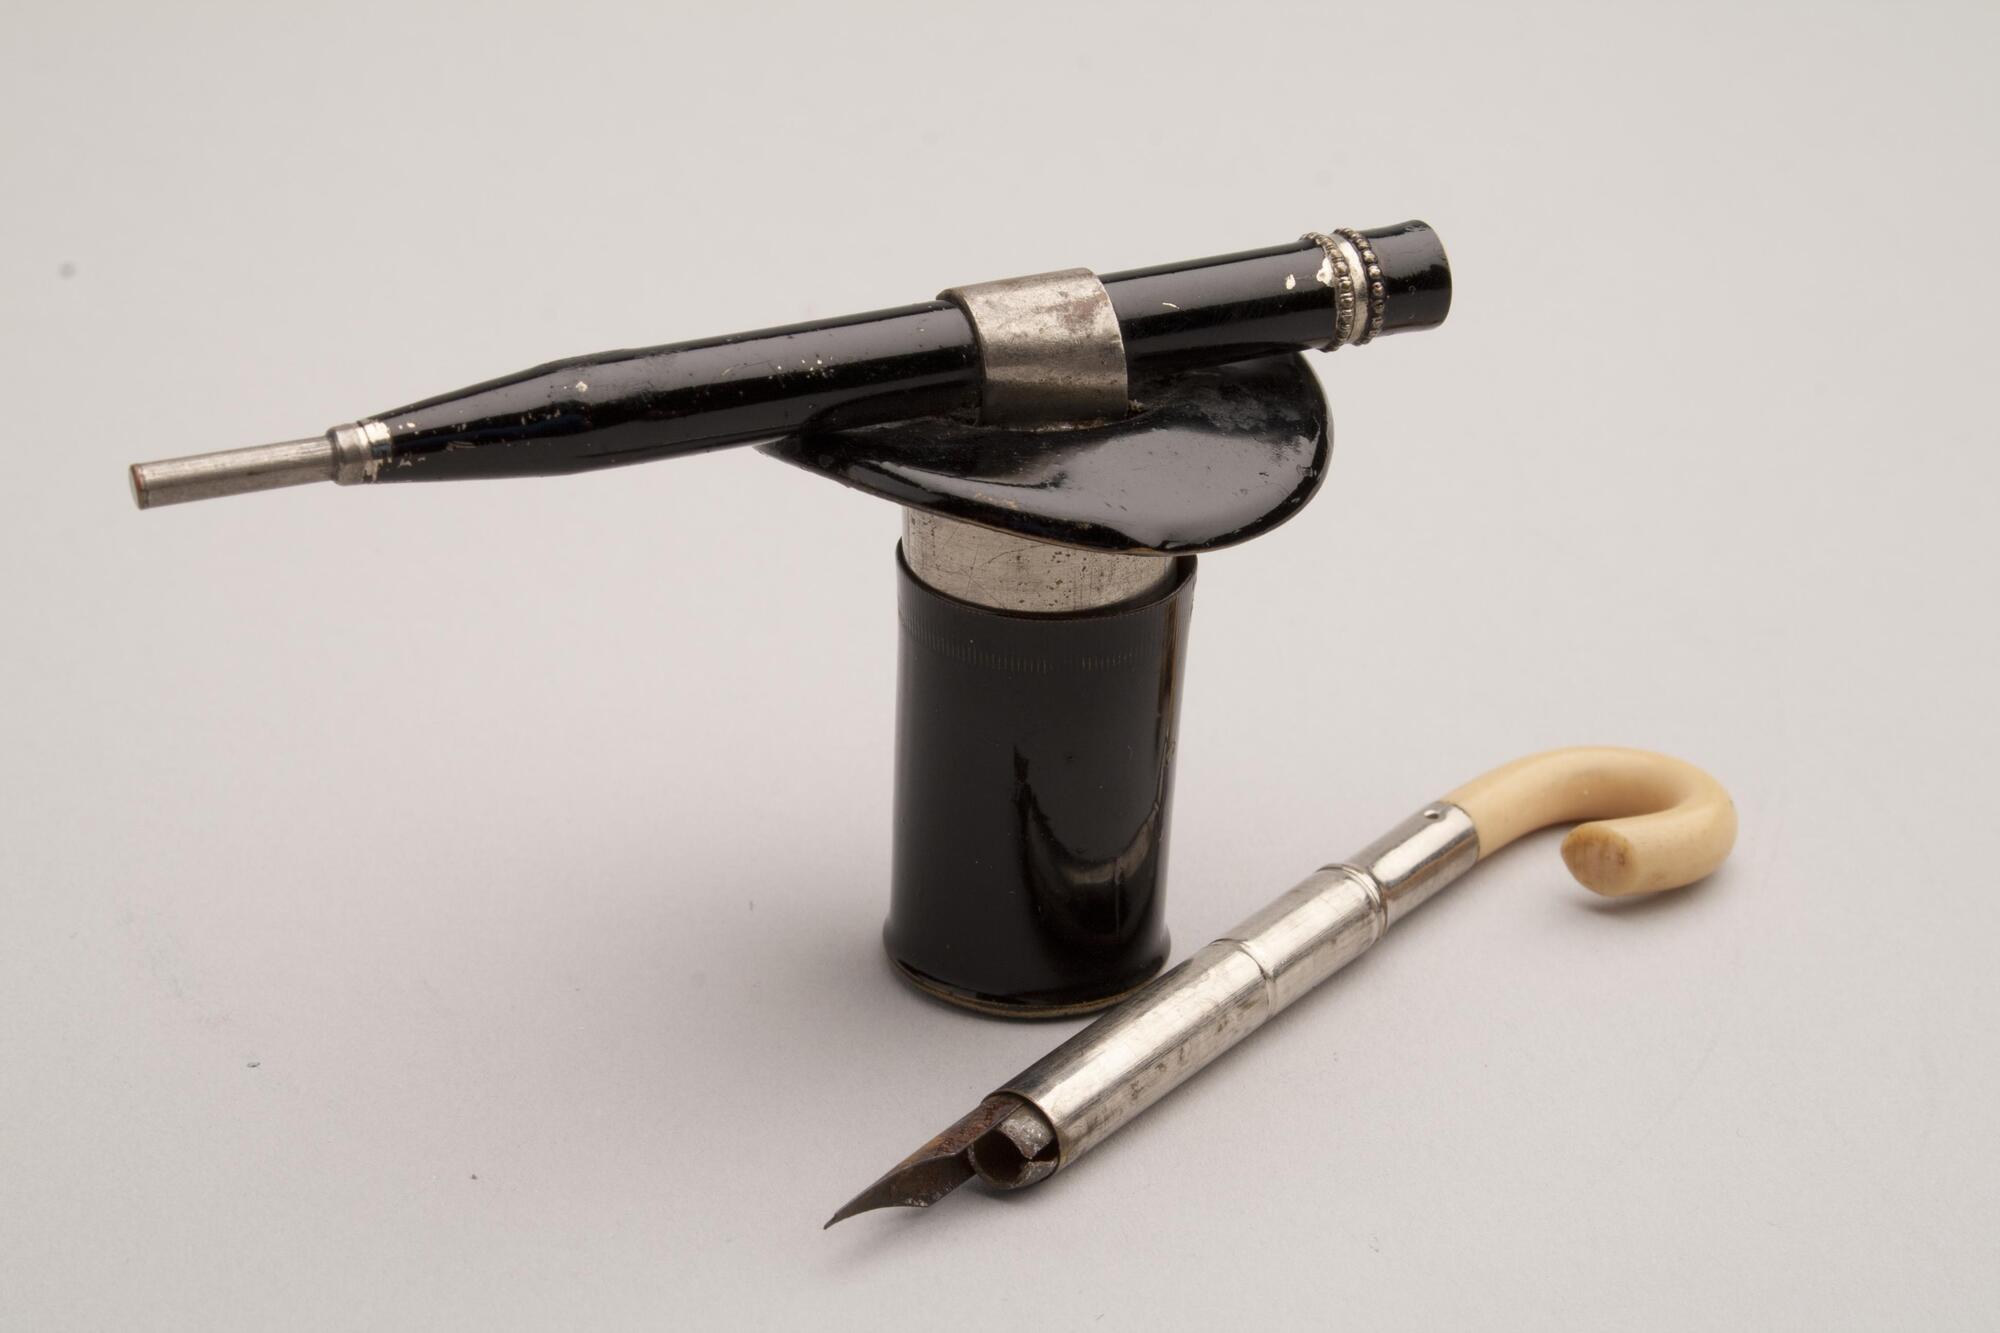 A metal inkwell in the shape of a black tophat.  A pen shaped like a cane is included. The handle of the cane is ivory.